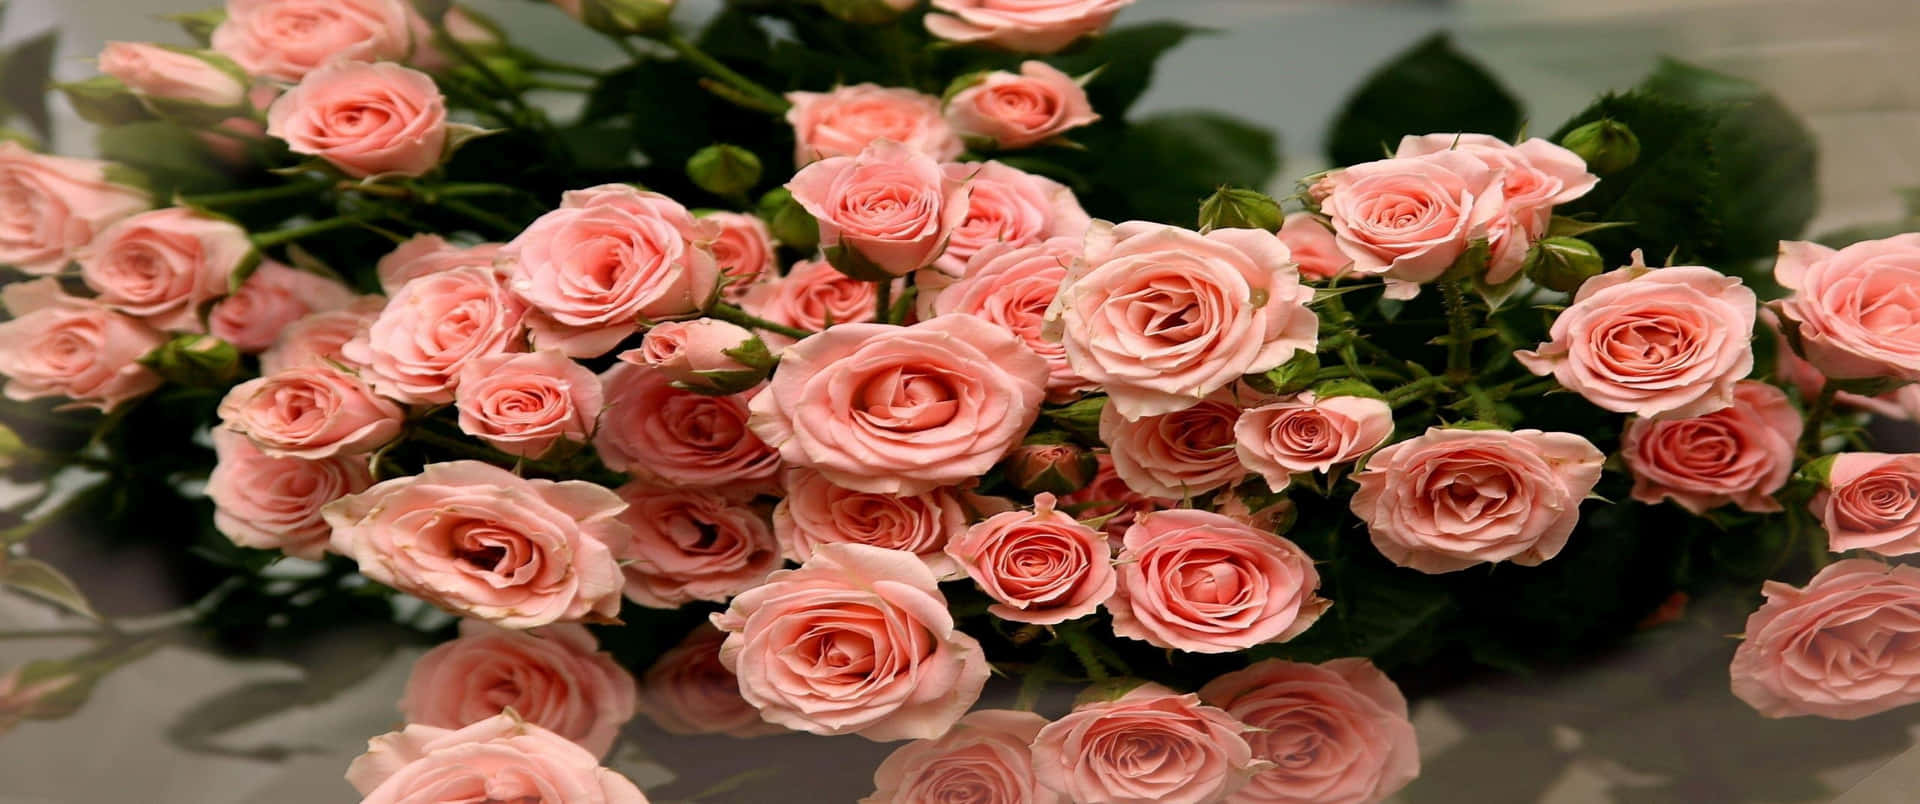 Romantic Fresh Roses In A Basket